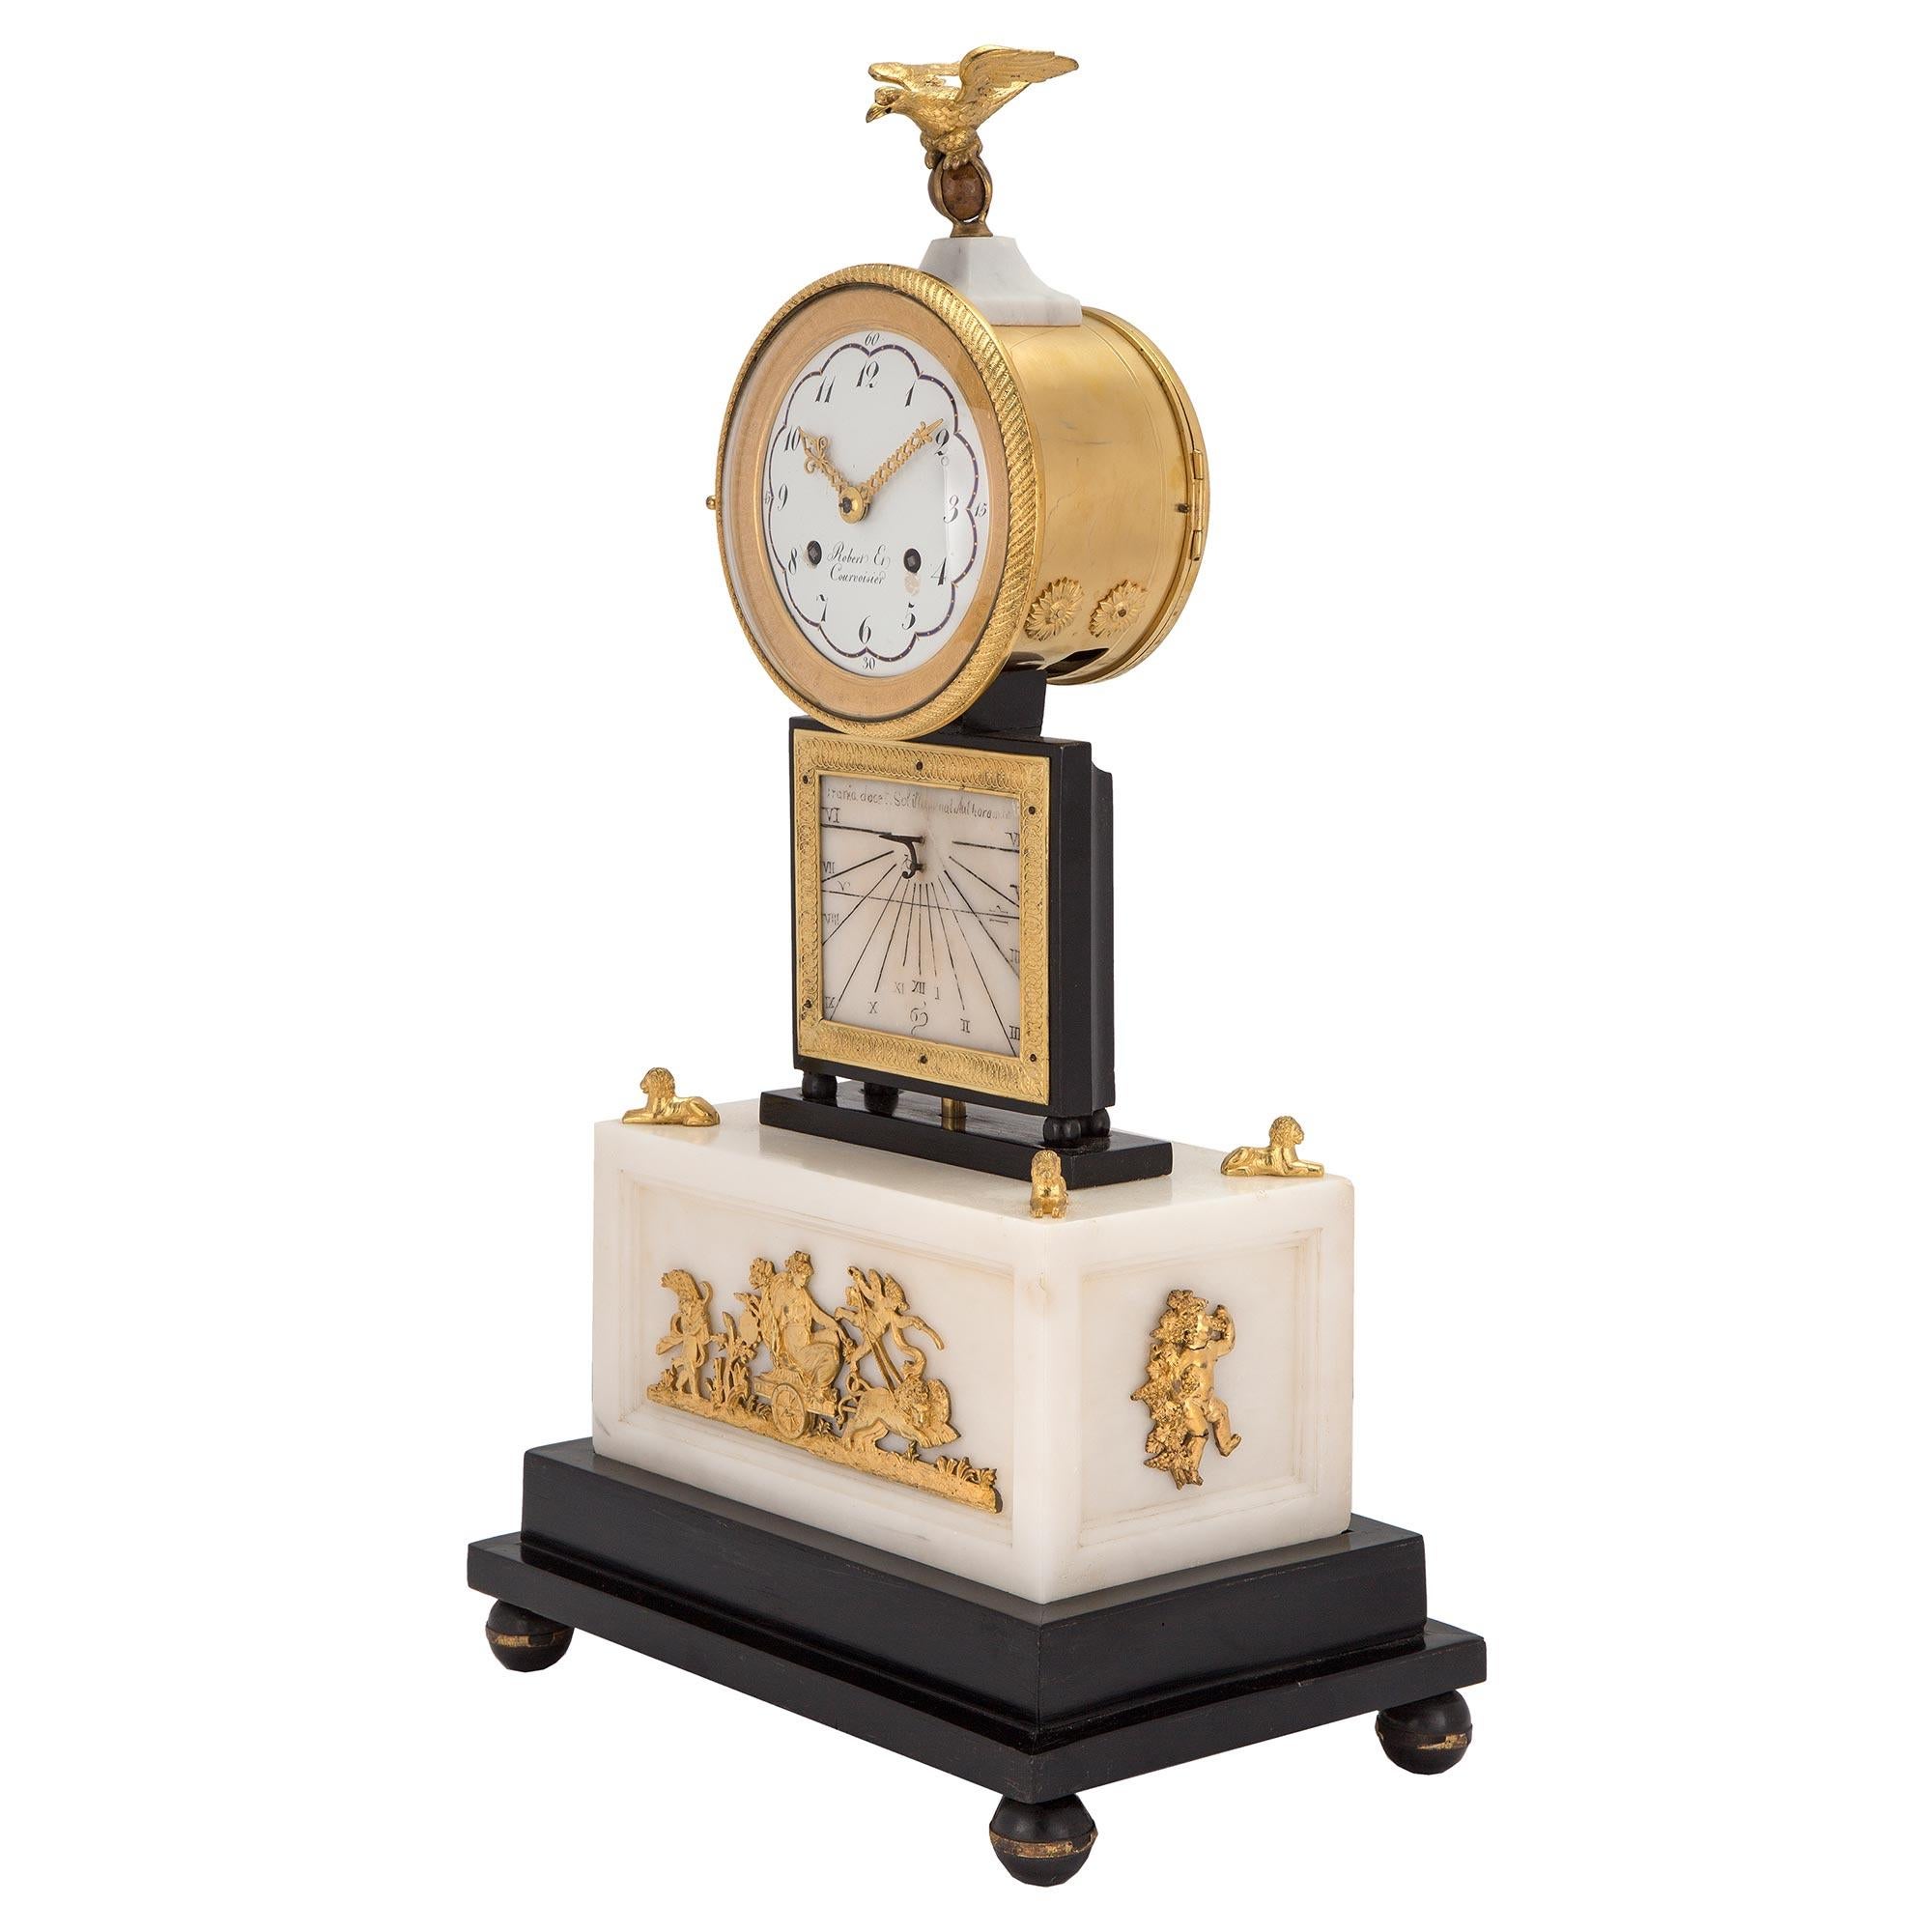 A very high quality and unique French early 19th century white Carrara marble and ormolu quarter strike clock with sundial, signed Robert et Courvoisier. The clock is raised on an ebonized fruitwood support with ball feet. The rectangular white